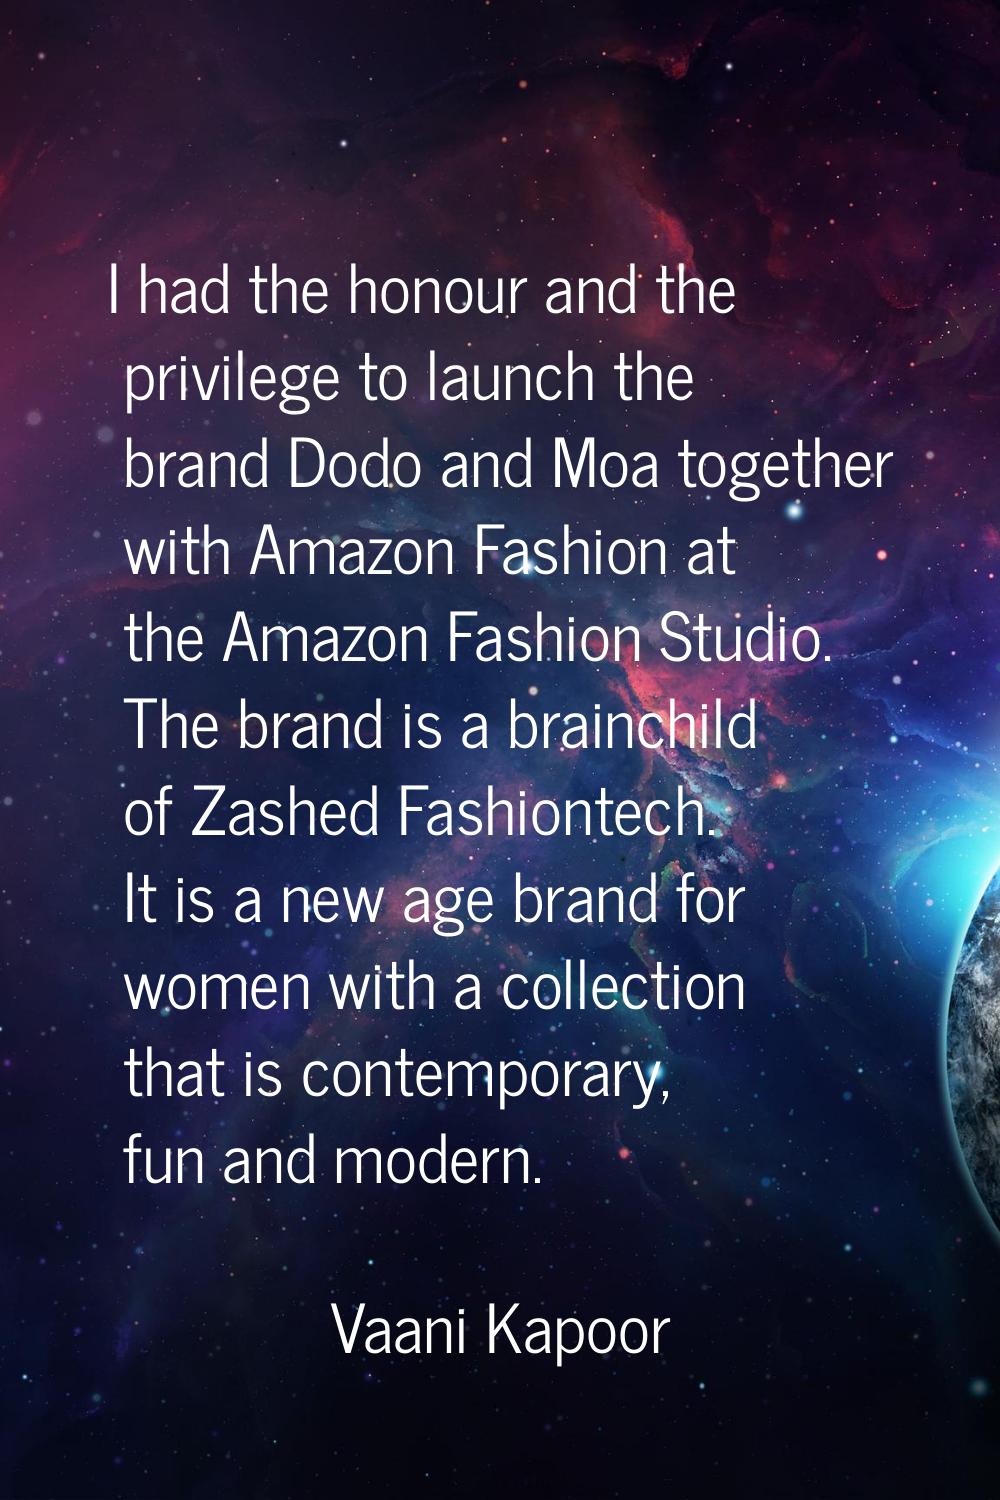 I had the honour and the privilege to launch the brand Dodo and Moa together with Amazon Fashion at